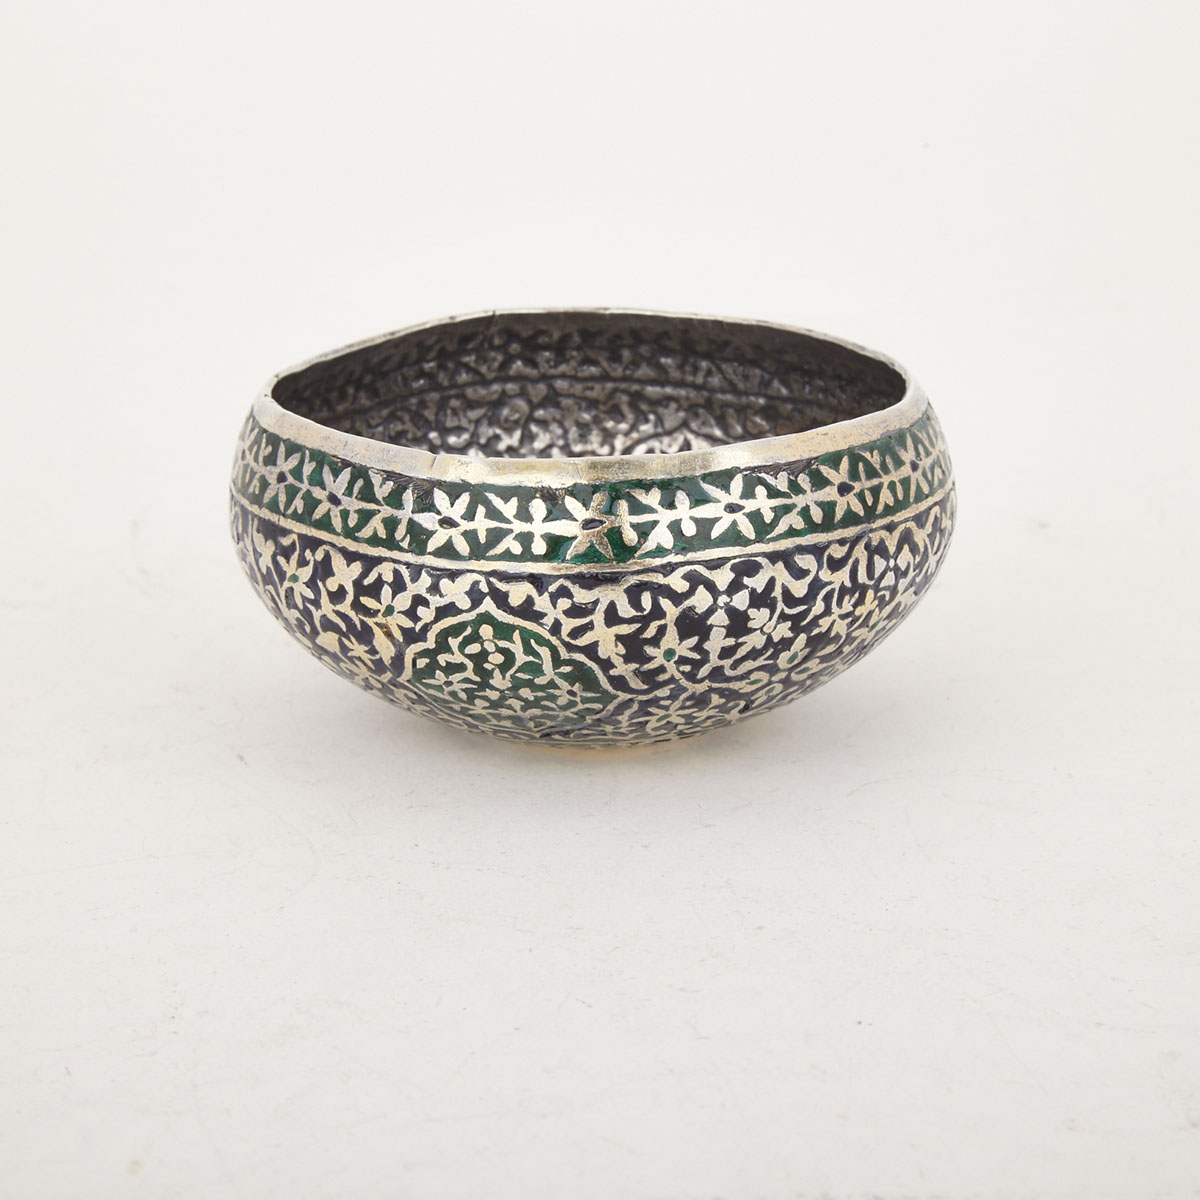 Persian Silver and Enamel Bowl, late 19th/early 20th century